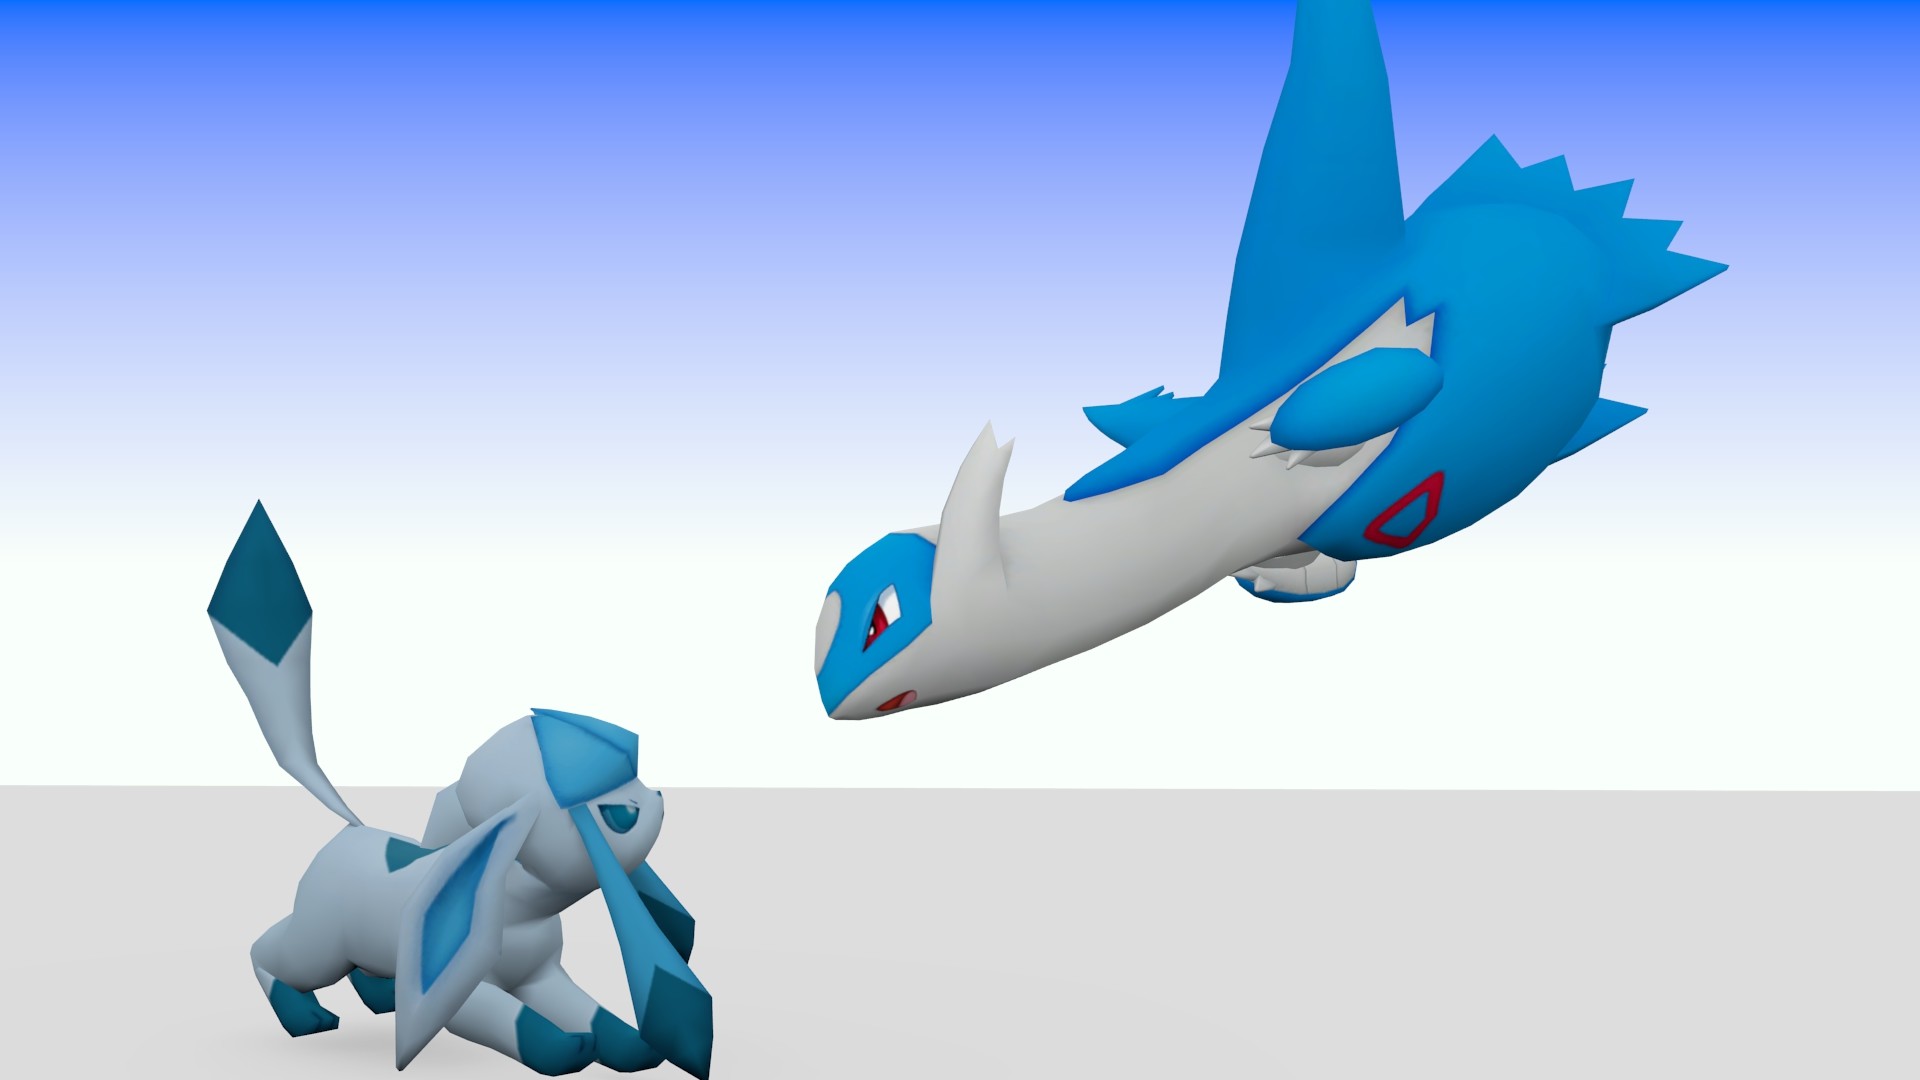 HD image of the Latios 3D Model available at ROEStudios.co.uk